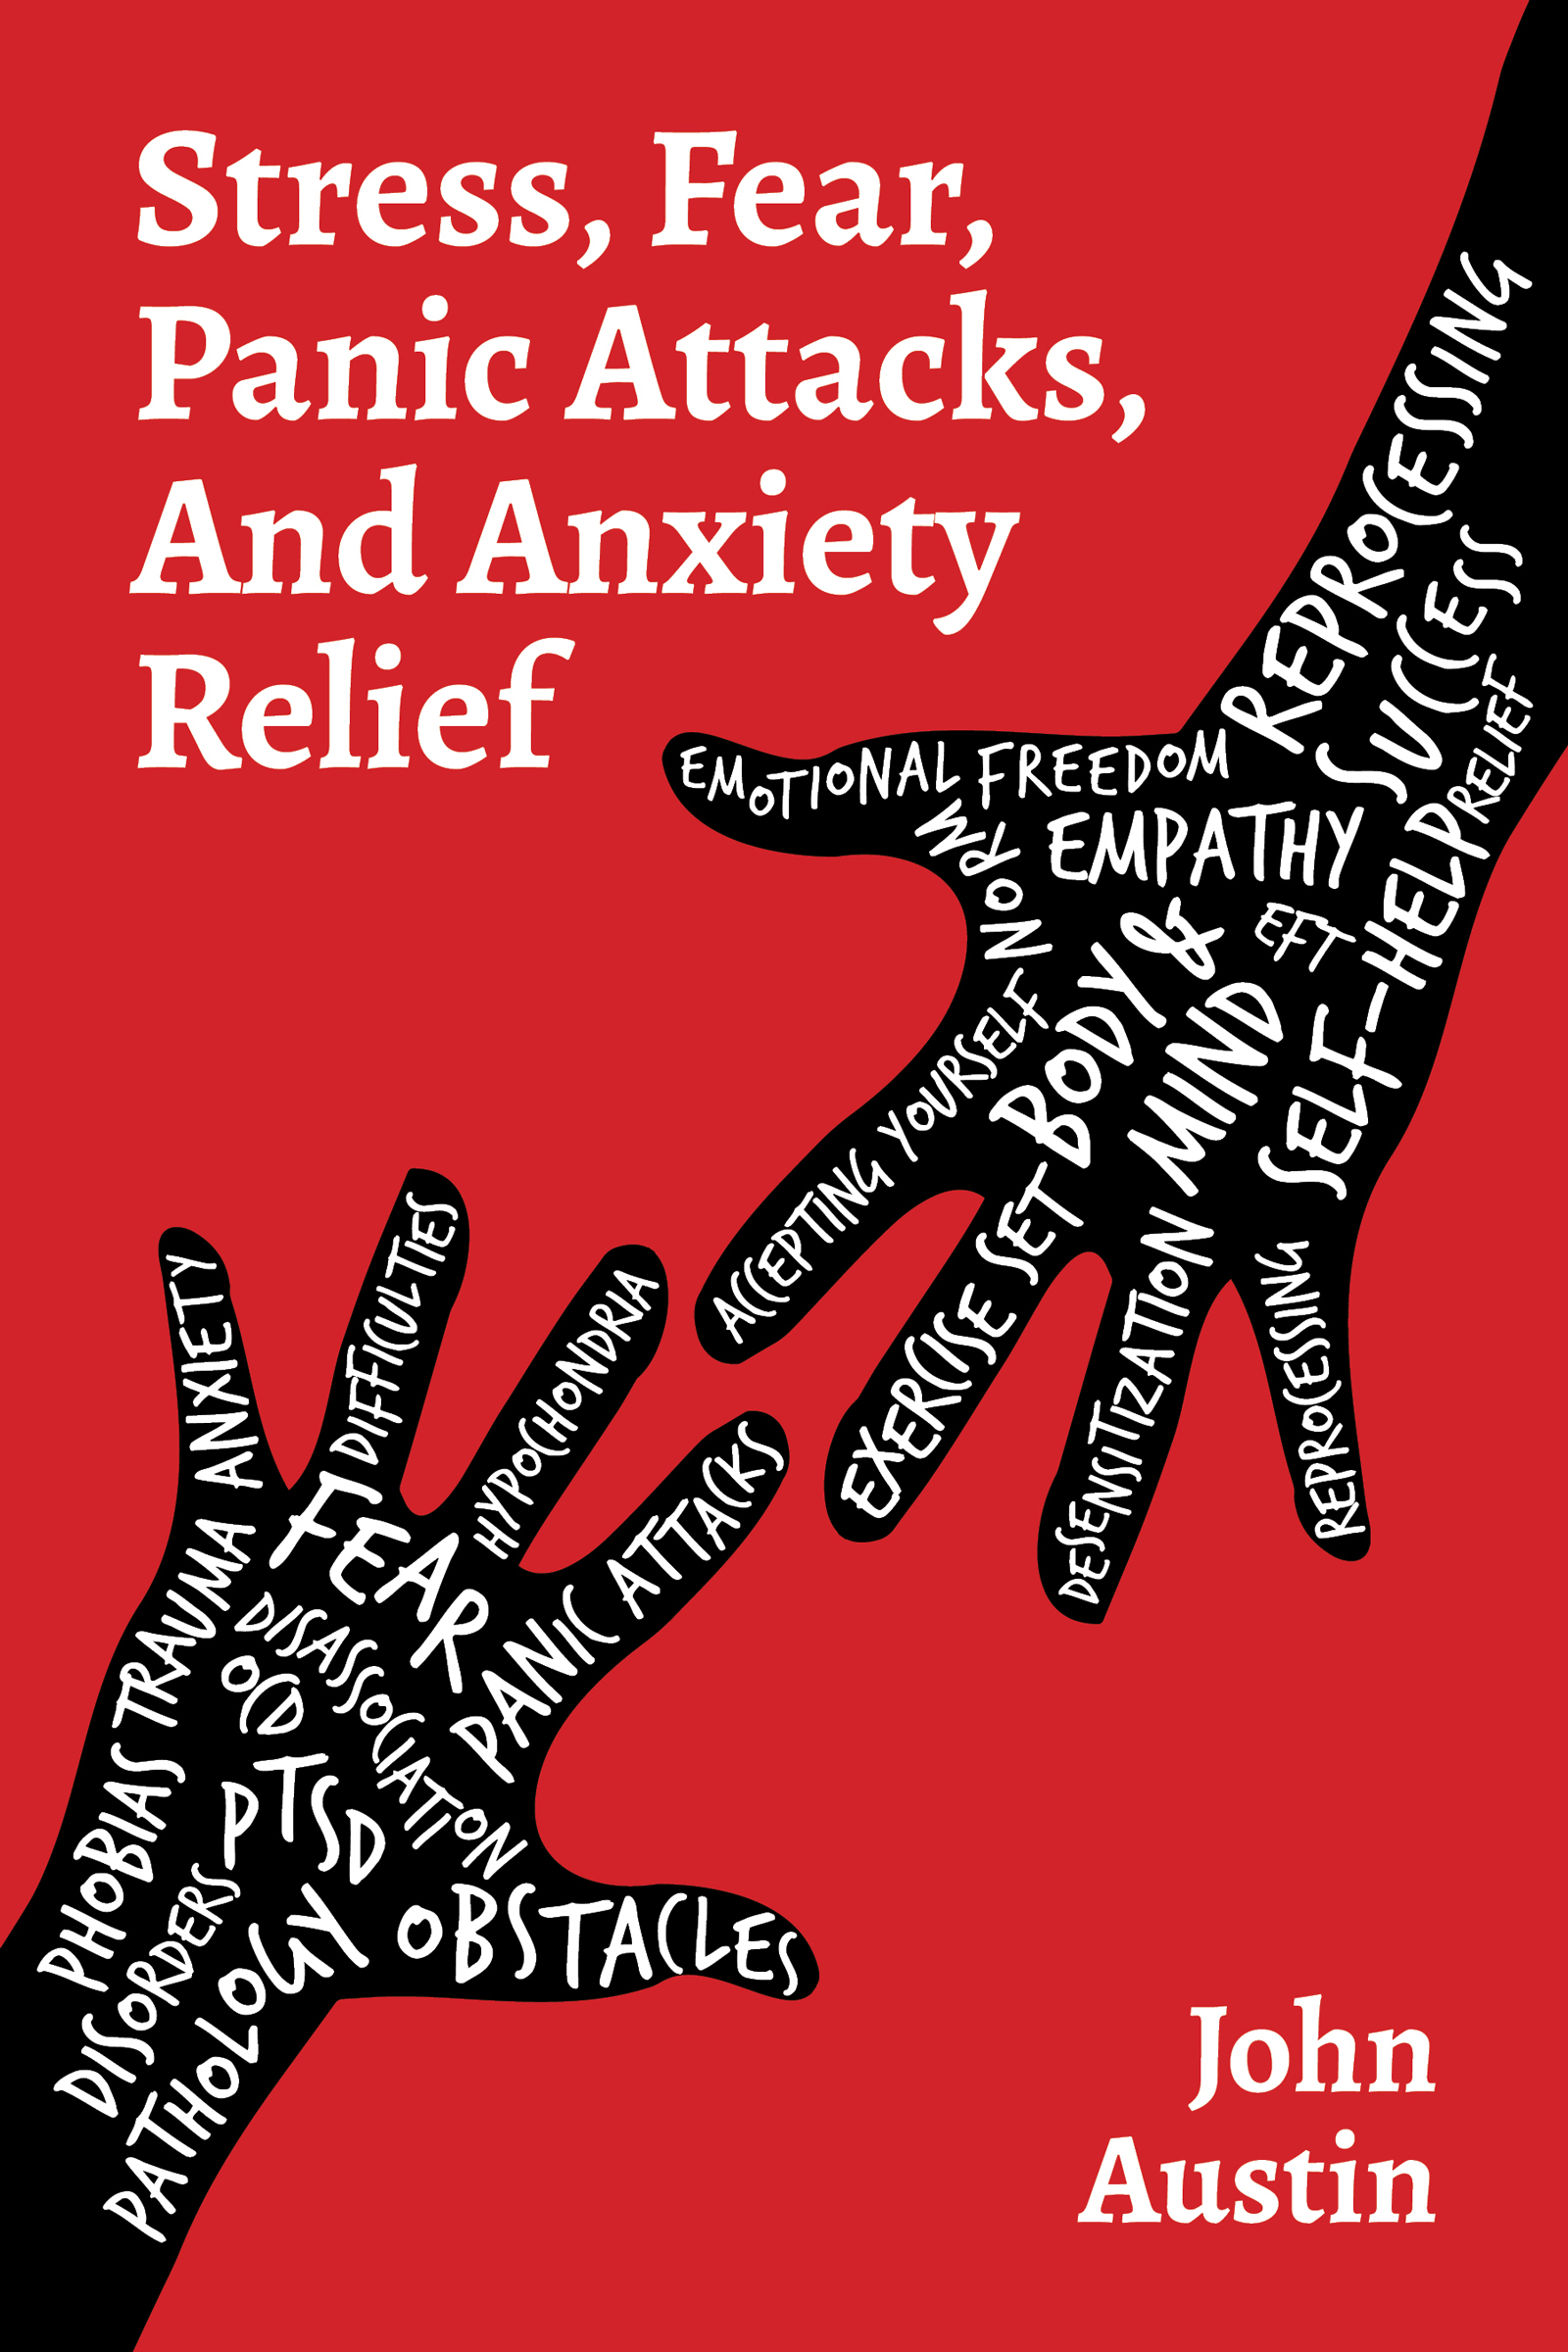 FREE: STRESS, FEAR, PANIC ATTACKS, AND ANXIETY RELIEF by John Austin